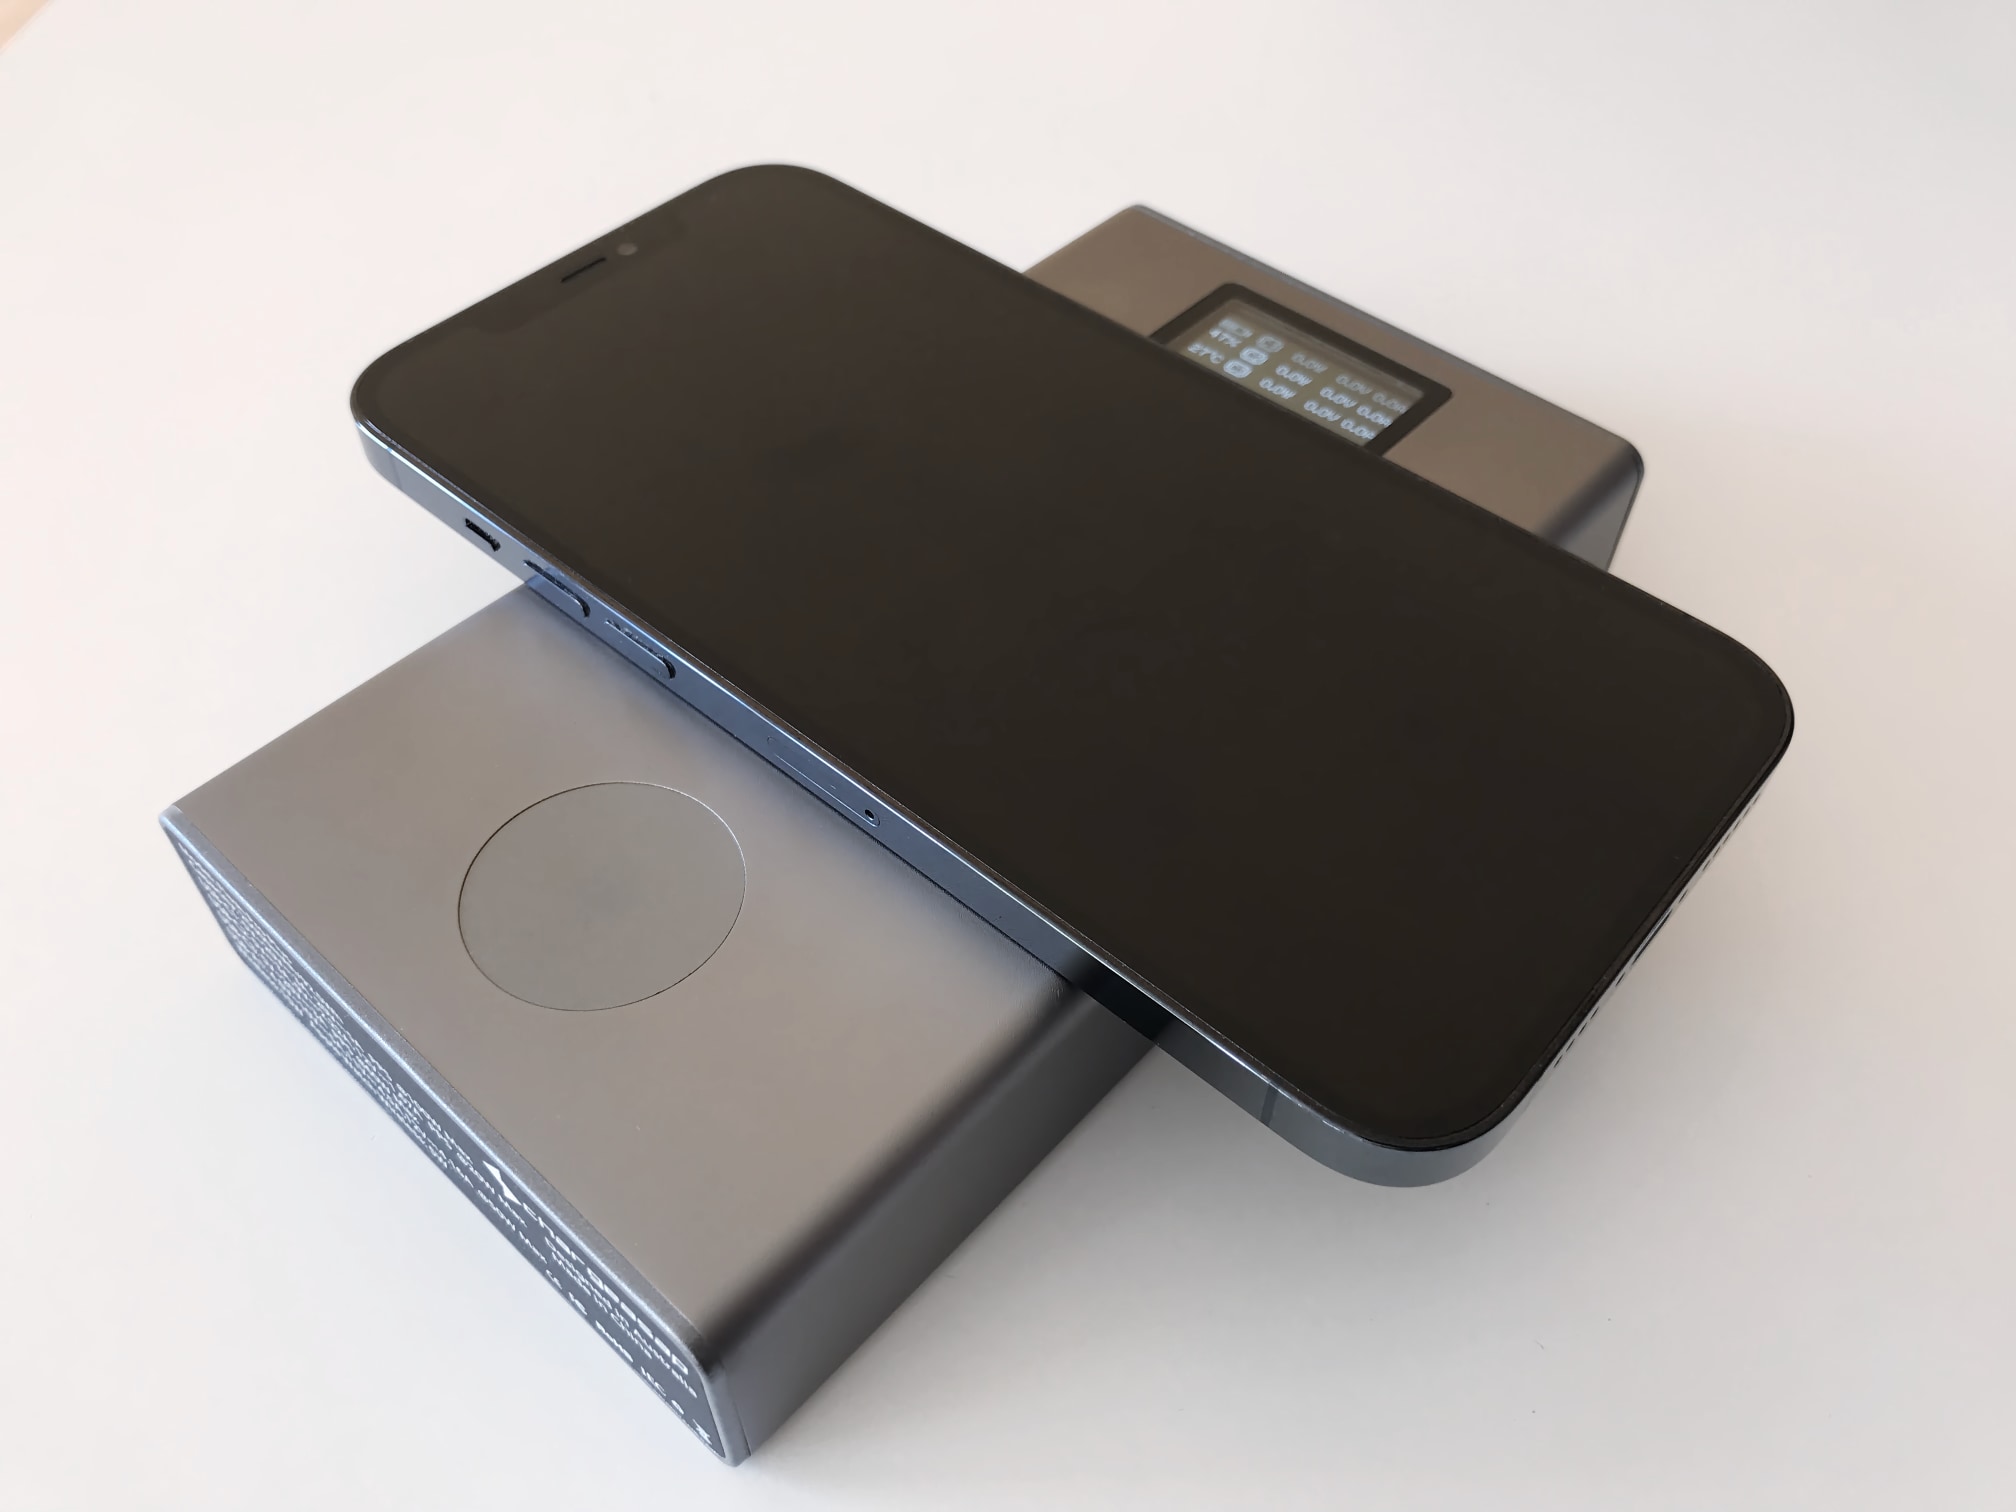 A photograph showing an isometric view of iPhone 12 Pro Max resting and wirelessly charging on the MagSafe pad of Chargeasap's Flash Pro Plus portable power bank